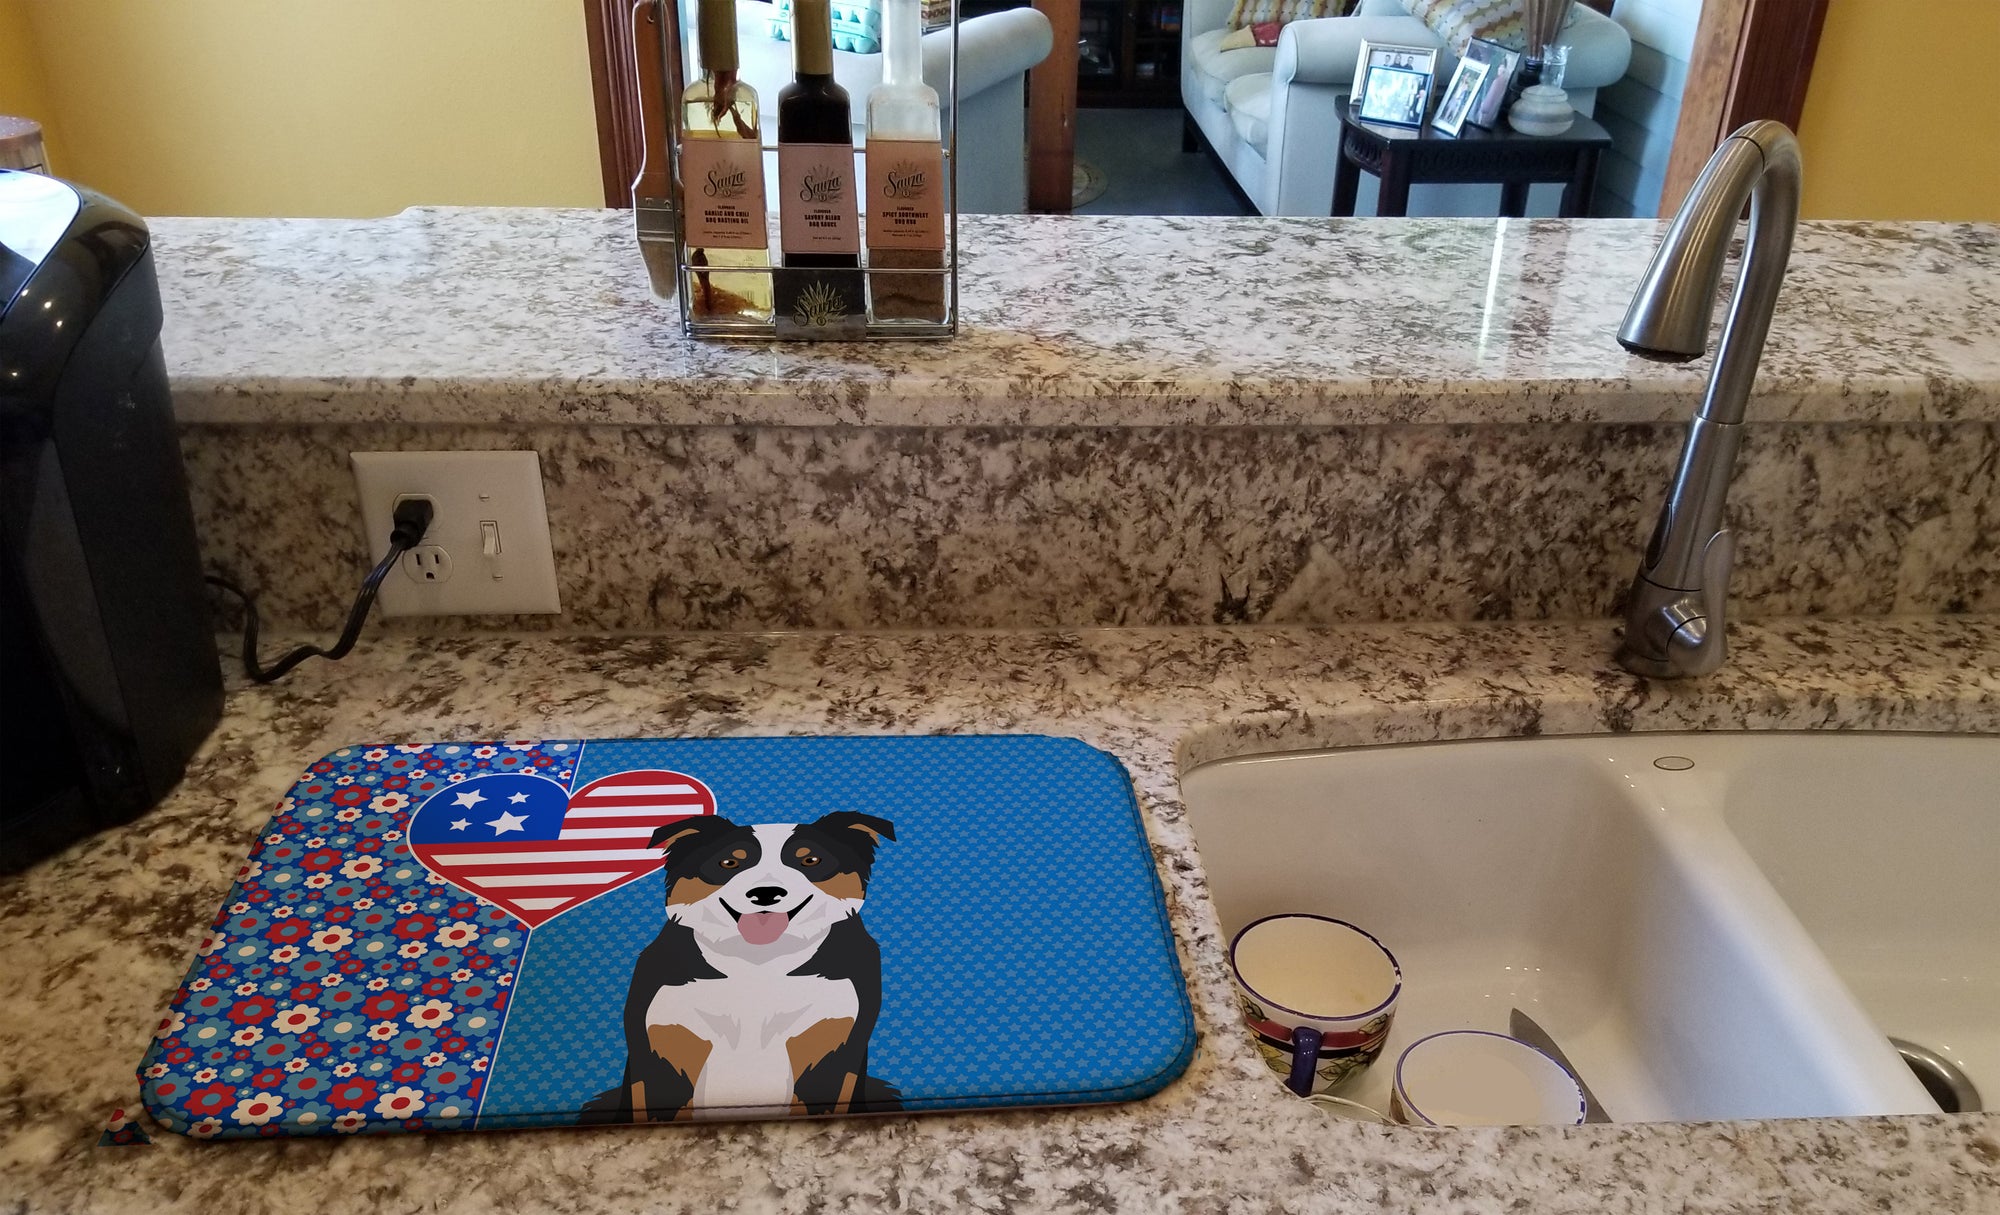 Tricolor Border Collie USA American Dish Drying Mat